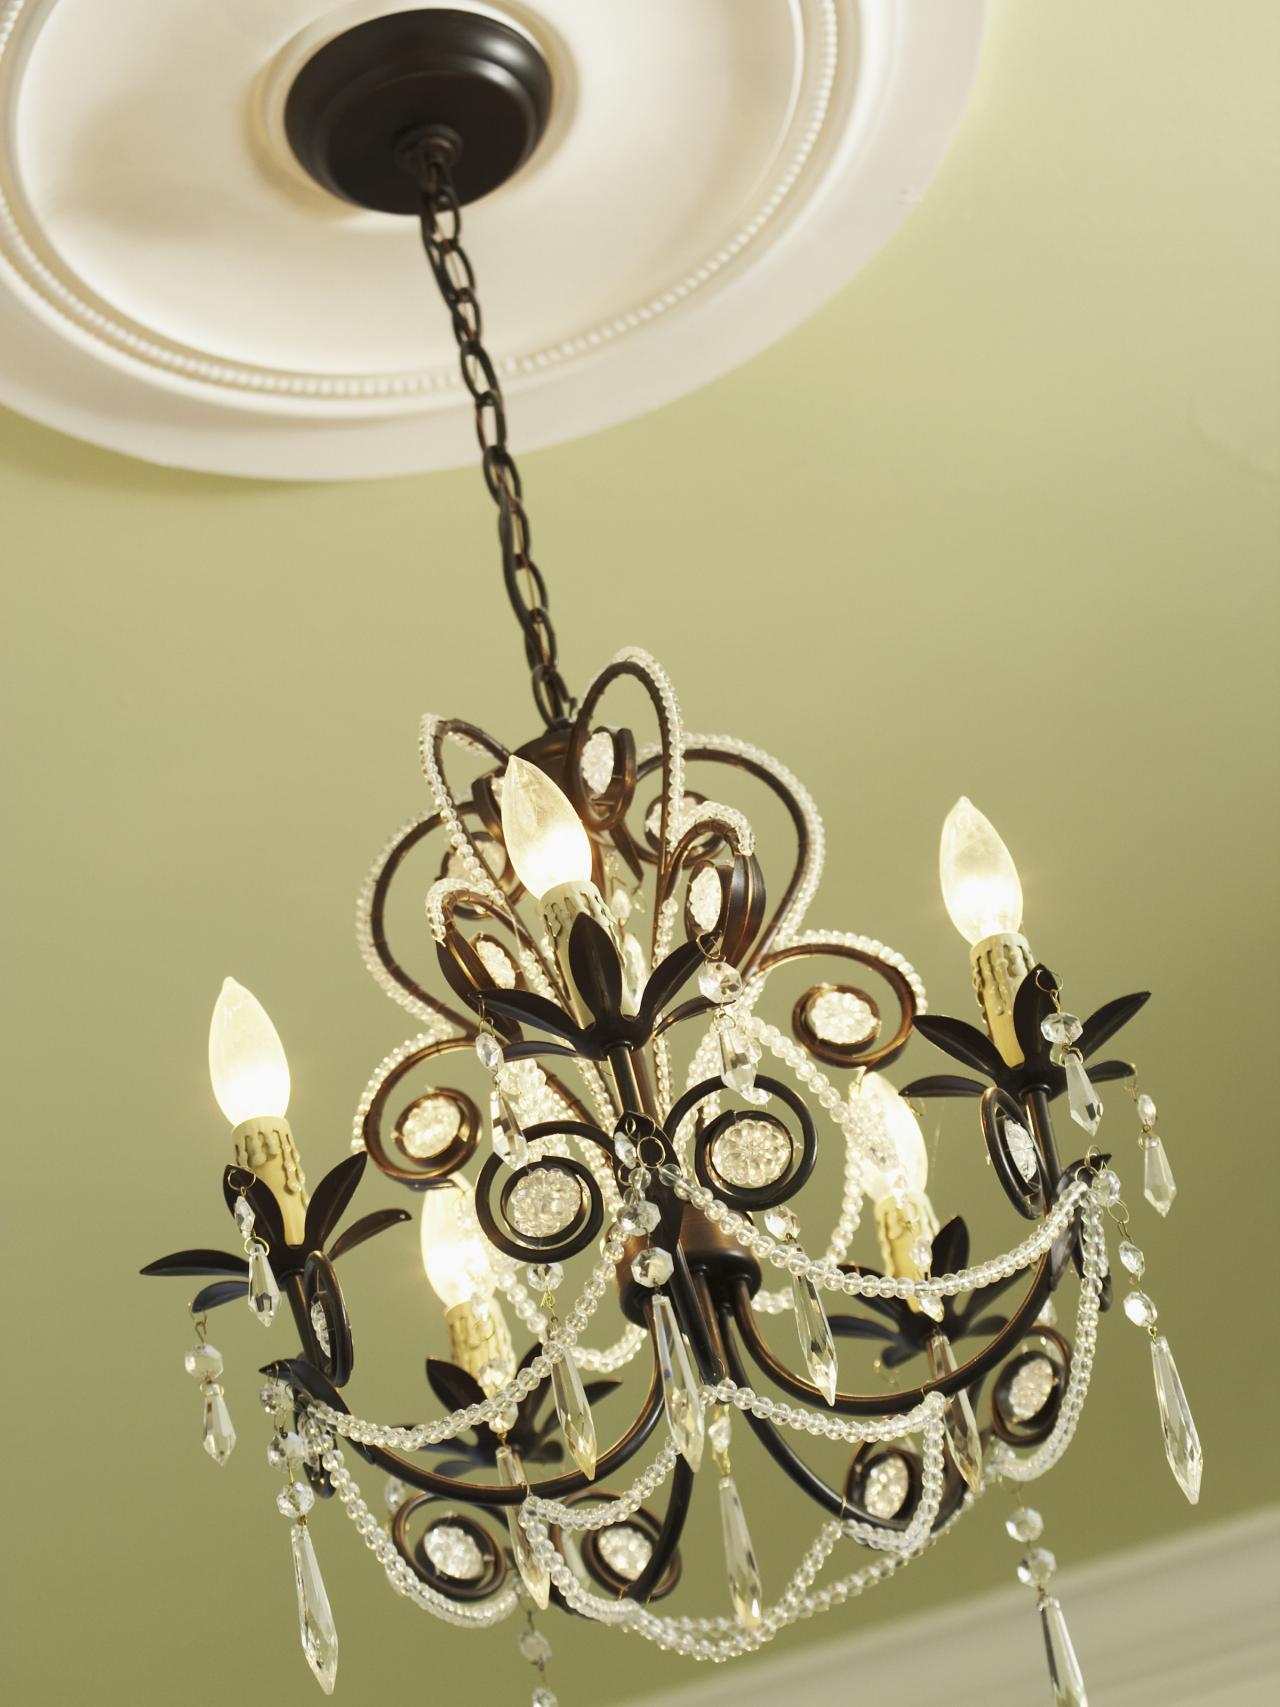 How To Install A Decorative Ceiling Medallion - How To Install Chandelier In Ceiling